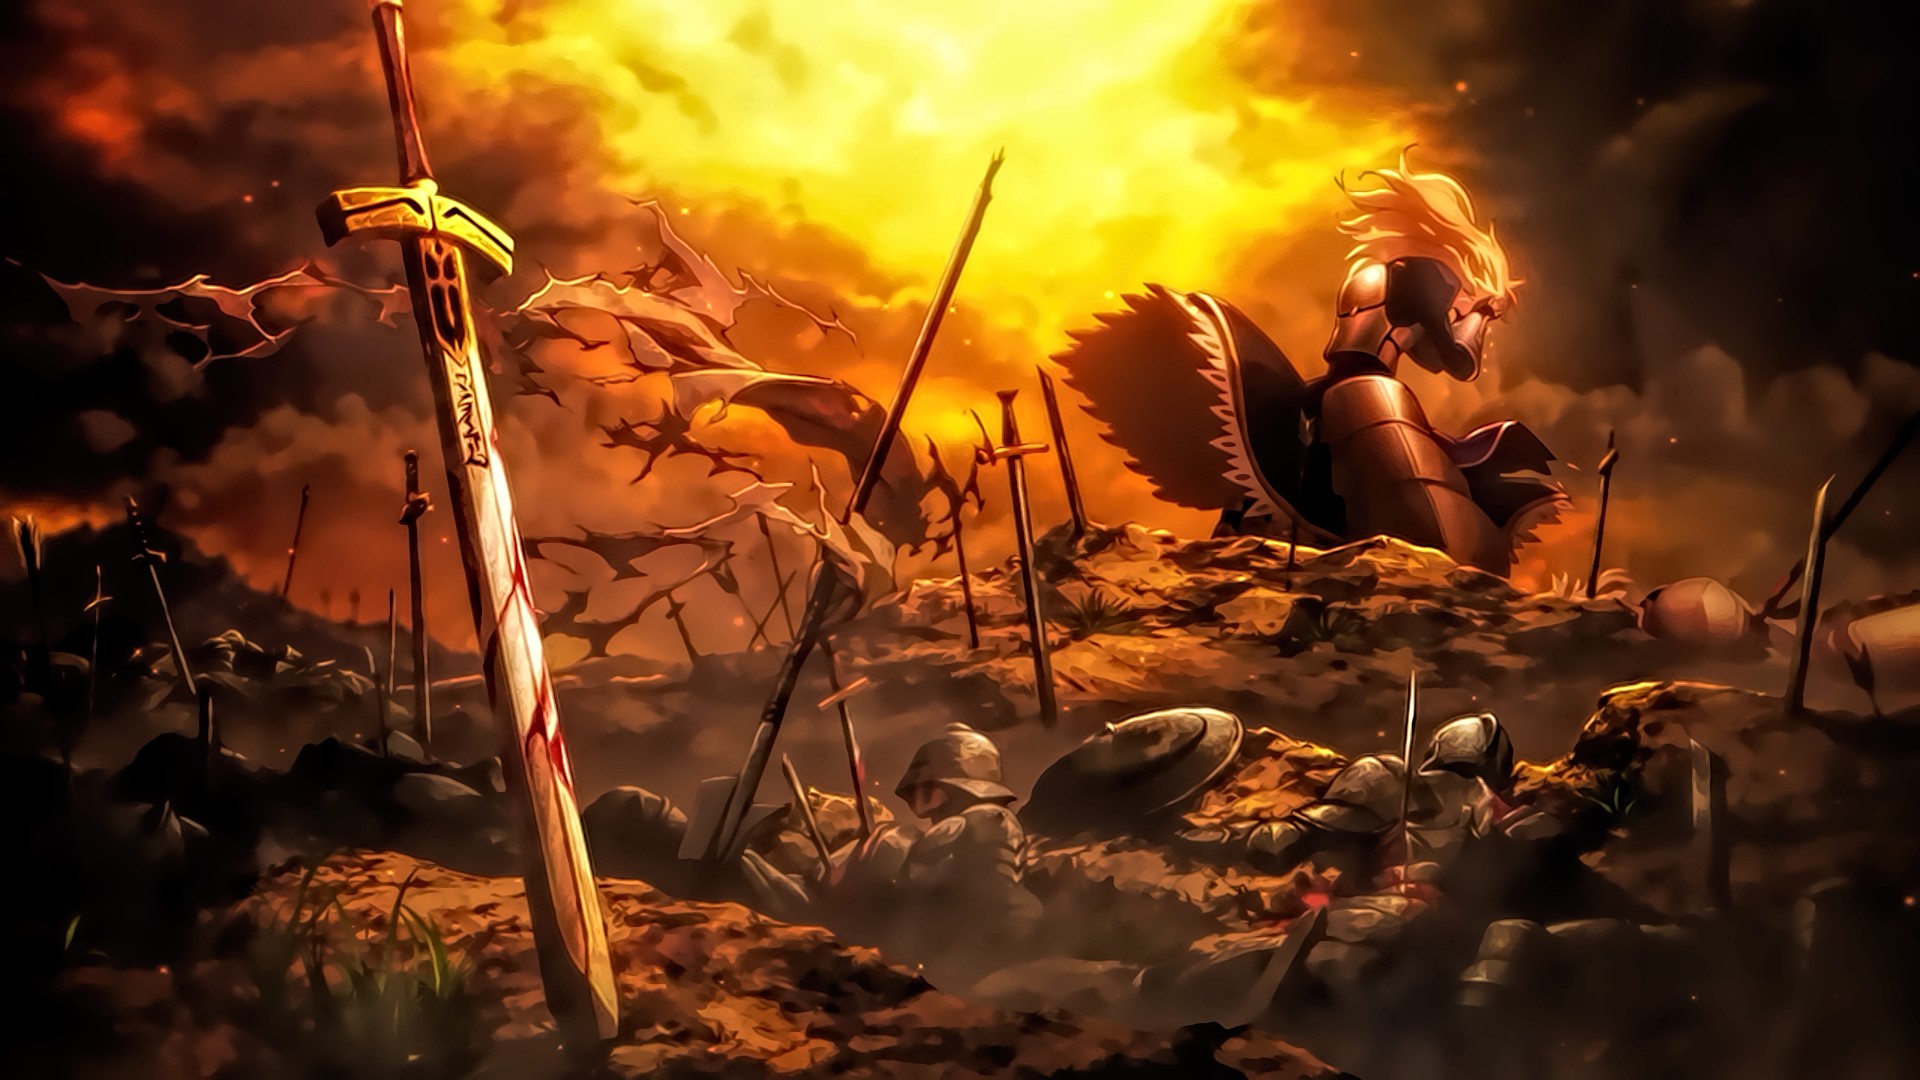 Saber, Fate Stay Night: Unlimited Blade Works Wallpaper